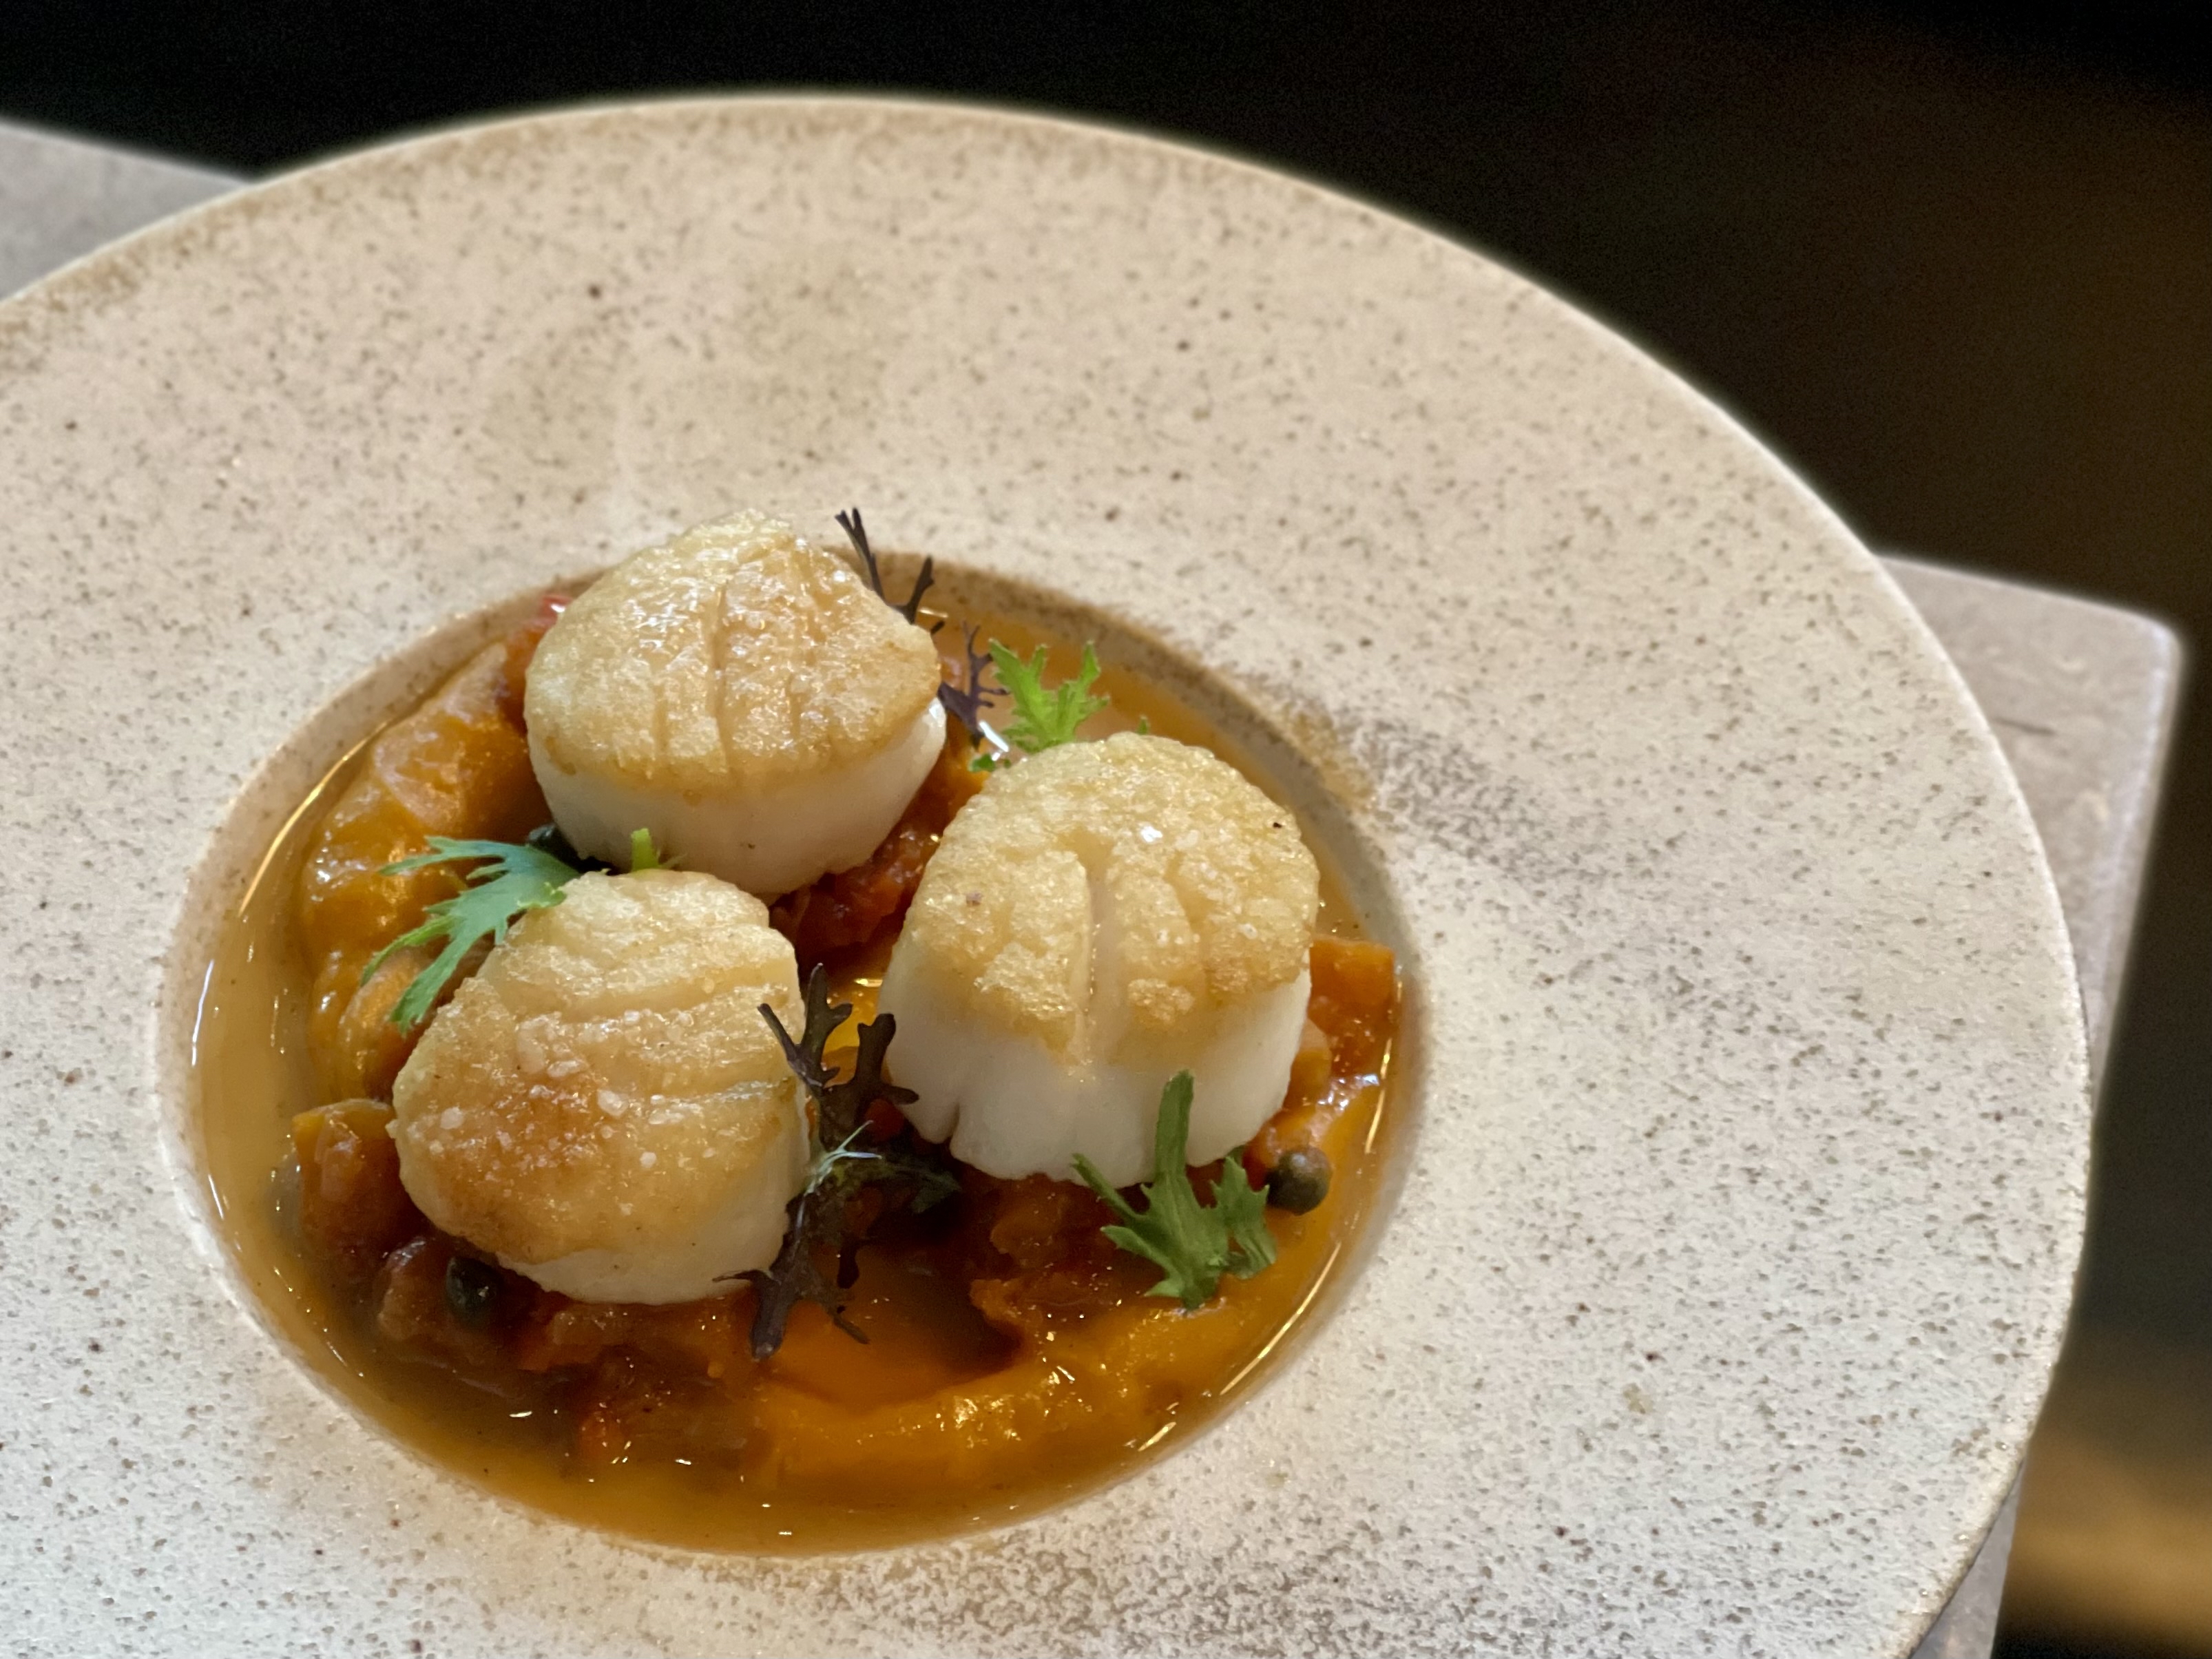 Three scallops sit on a white plate